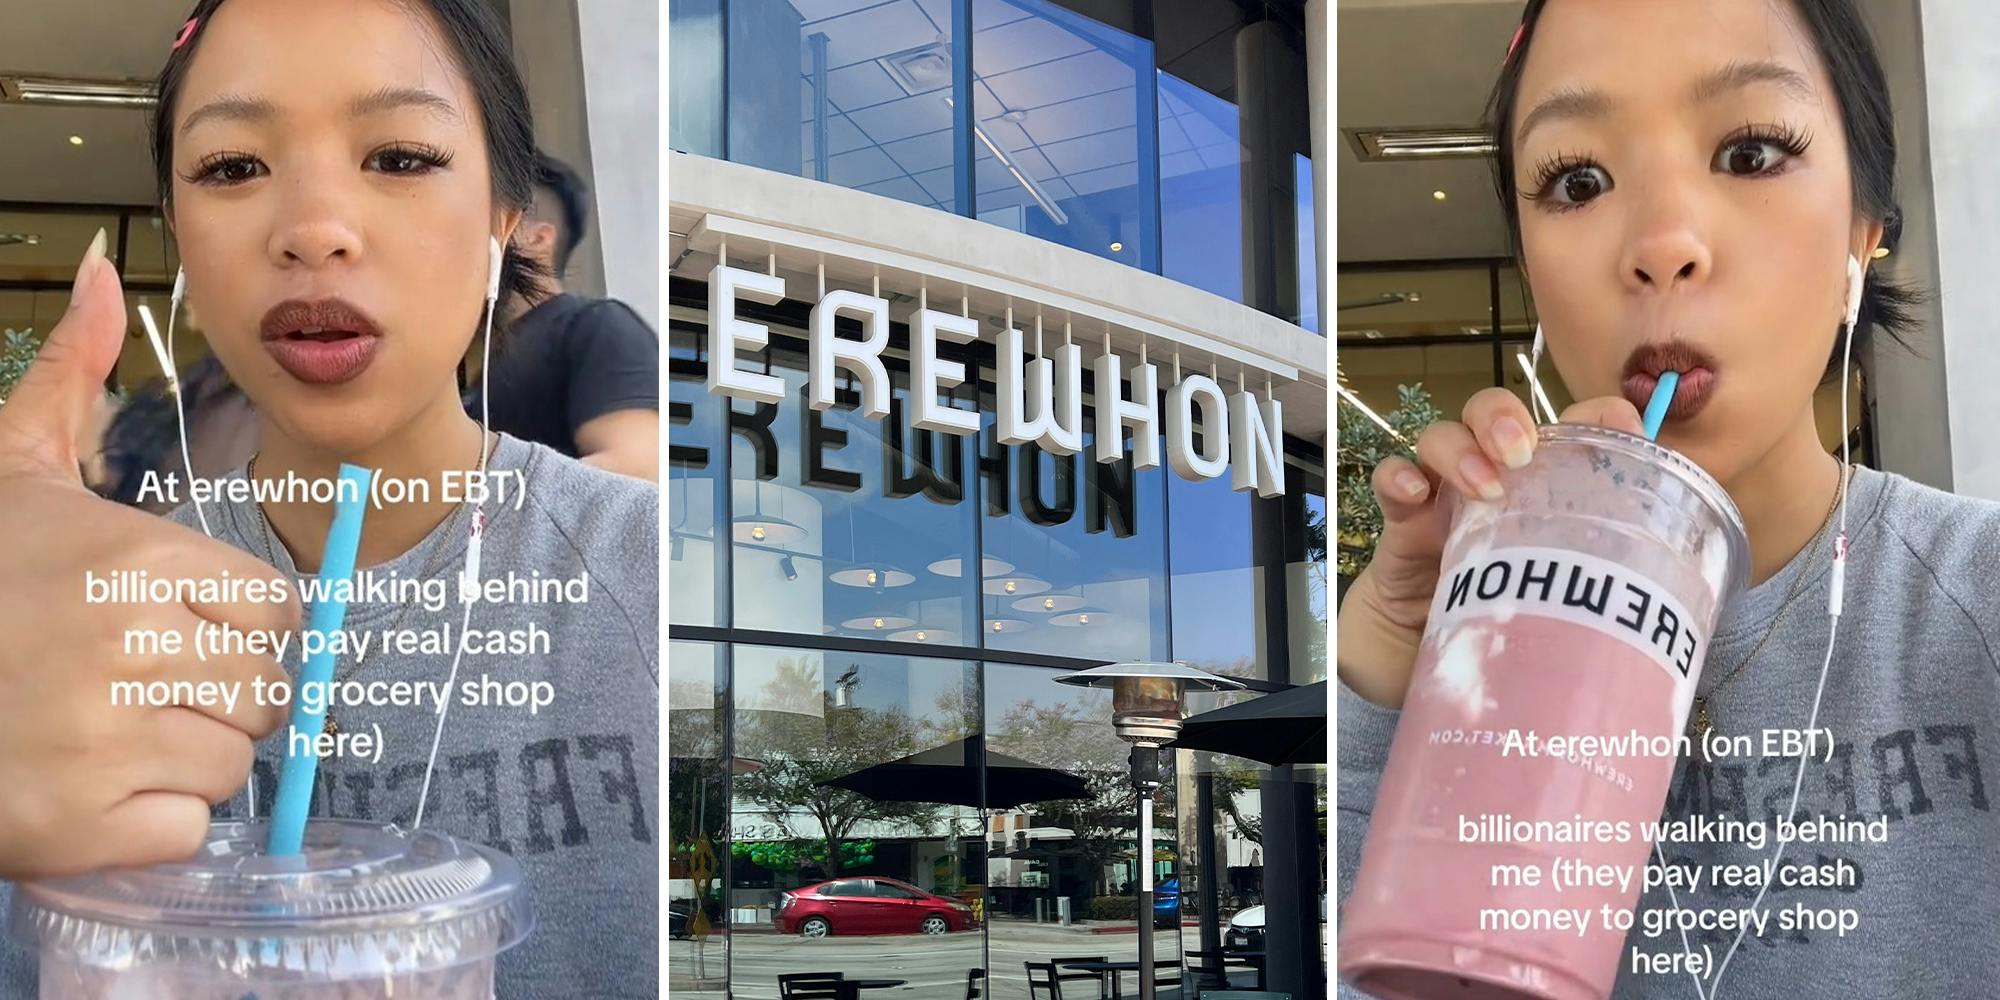 ‘Using EBT at erewhon is nuts’: Viewers divided after woman uses food stamps to buy Erewhon smoothie